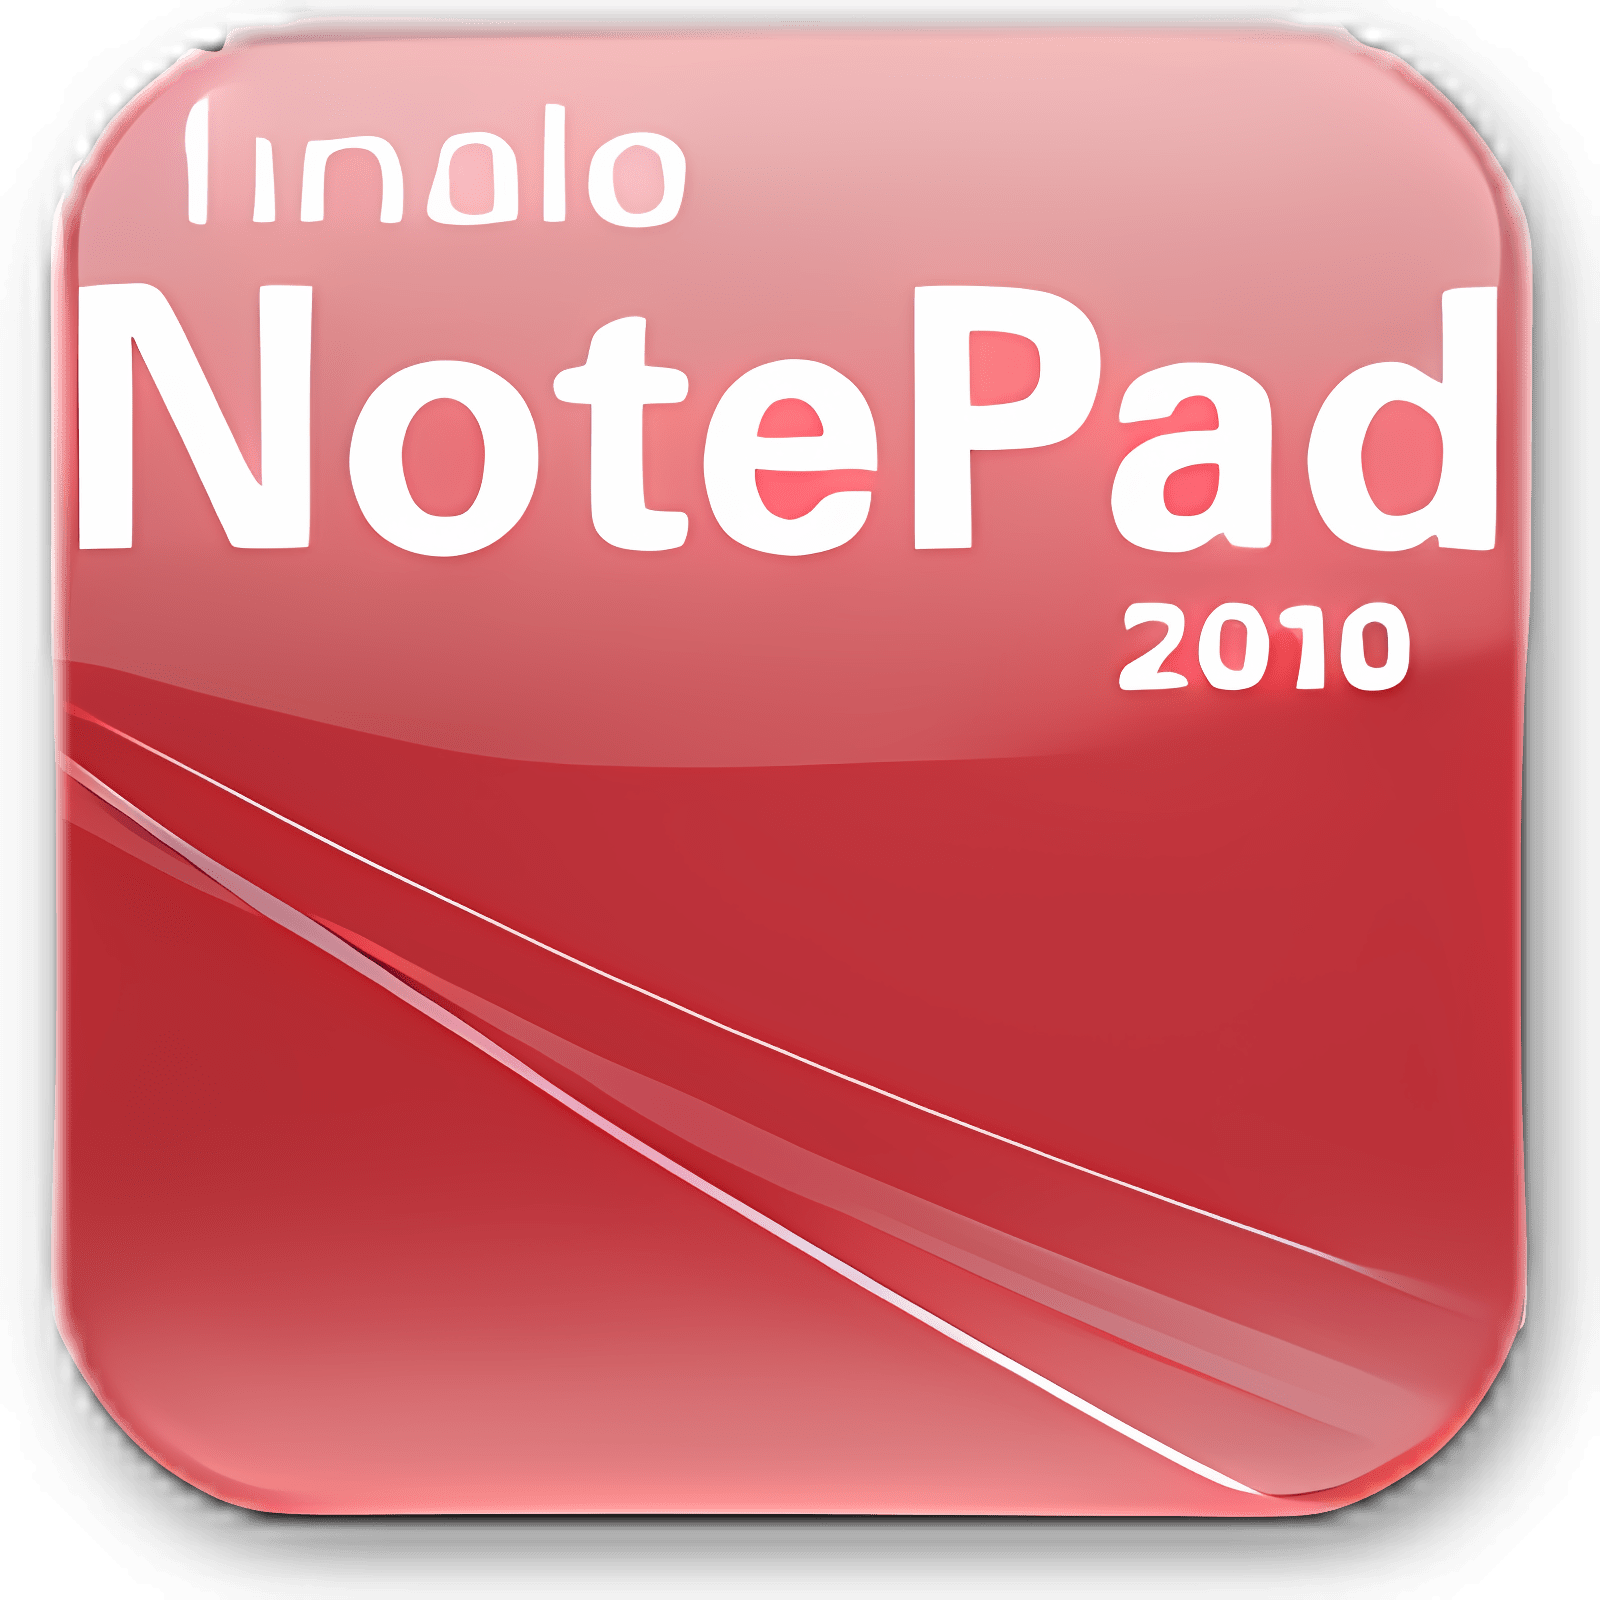 finale notepad free download full